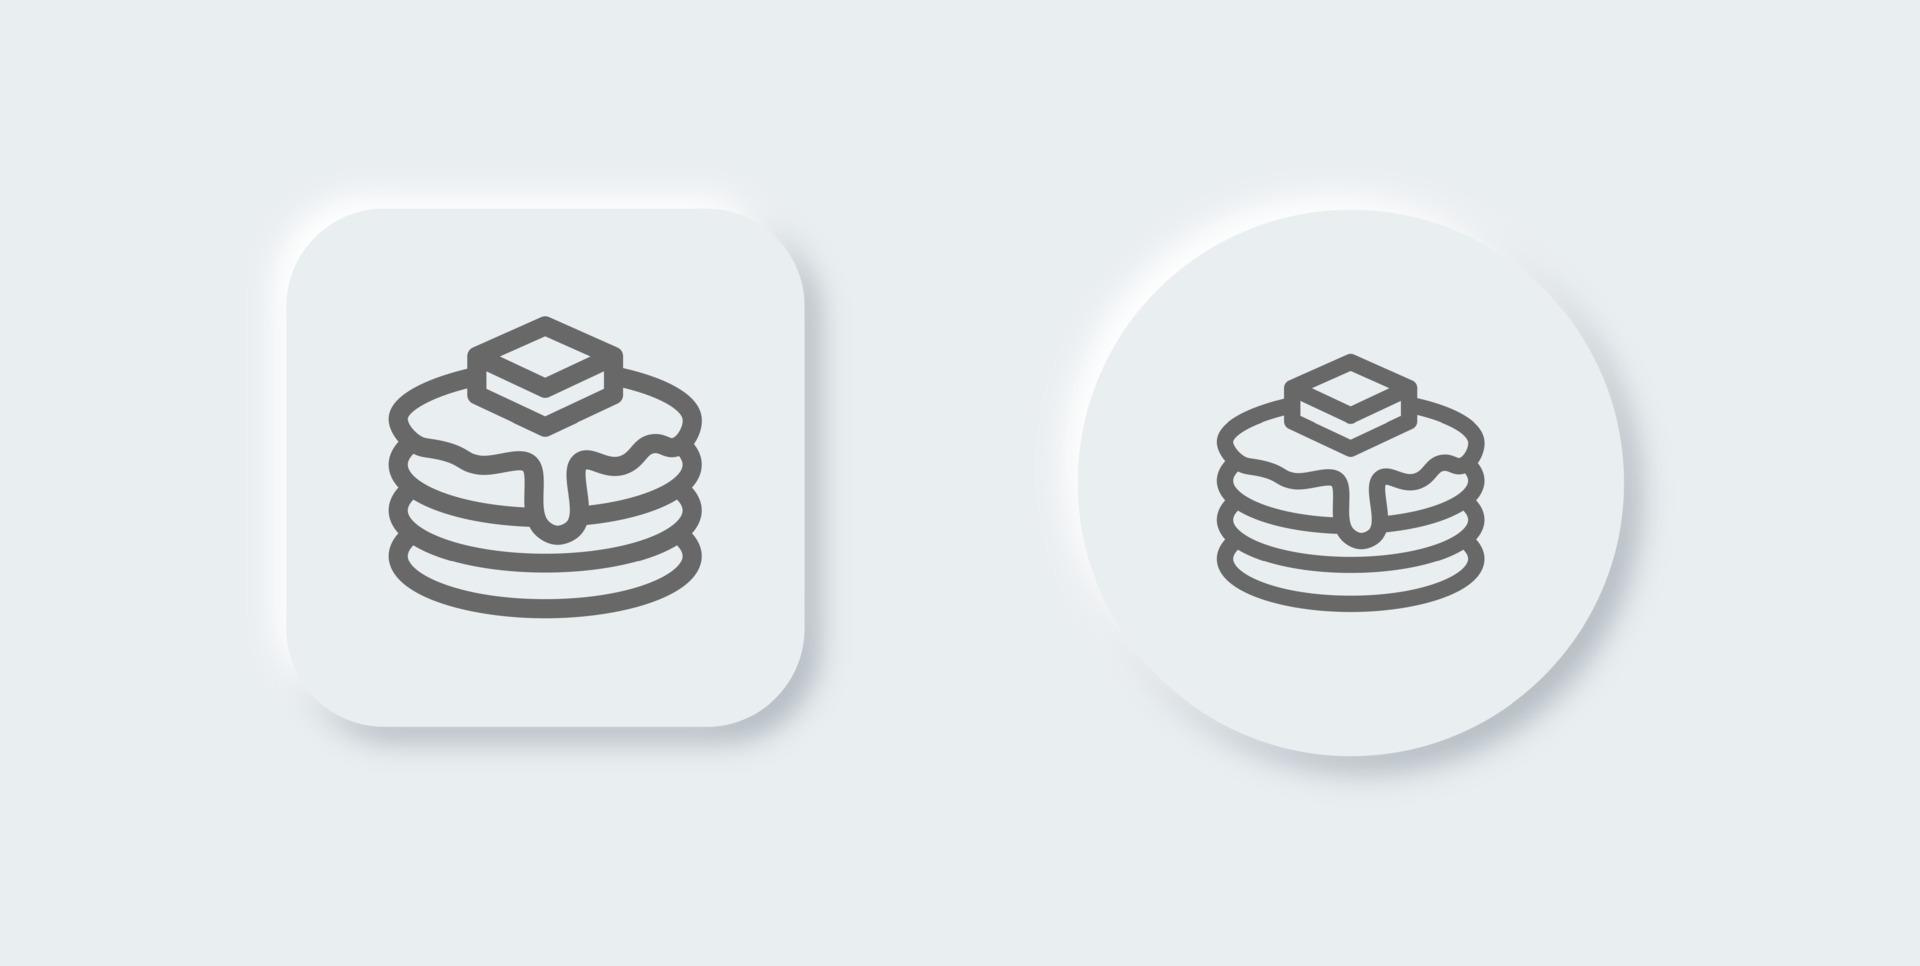 Pancake line icon in neomorphic design style. Butter syrup signs vector illustration.